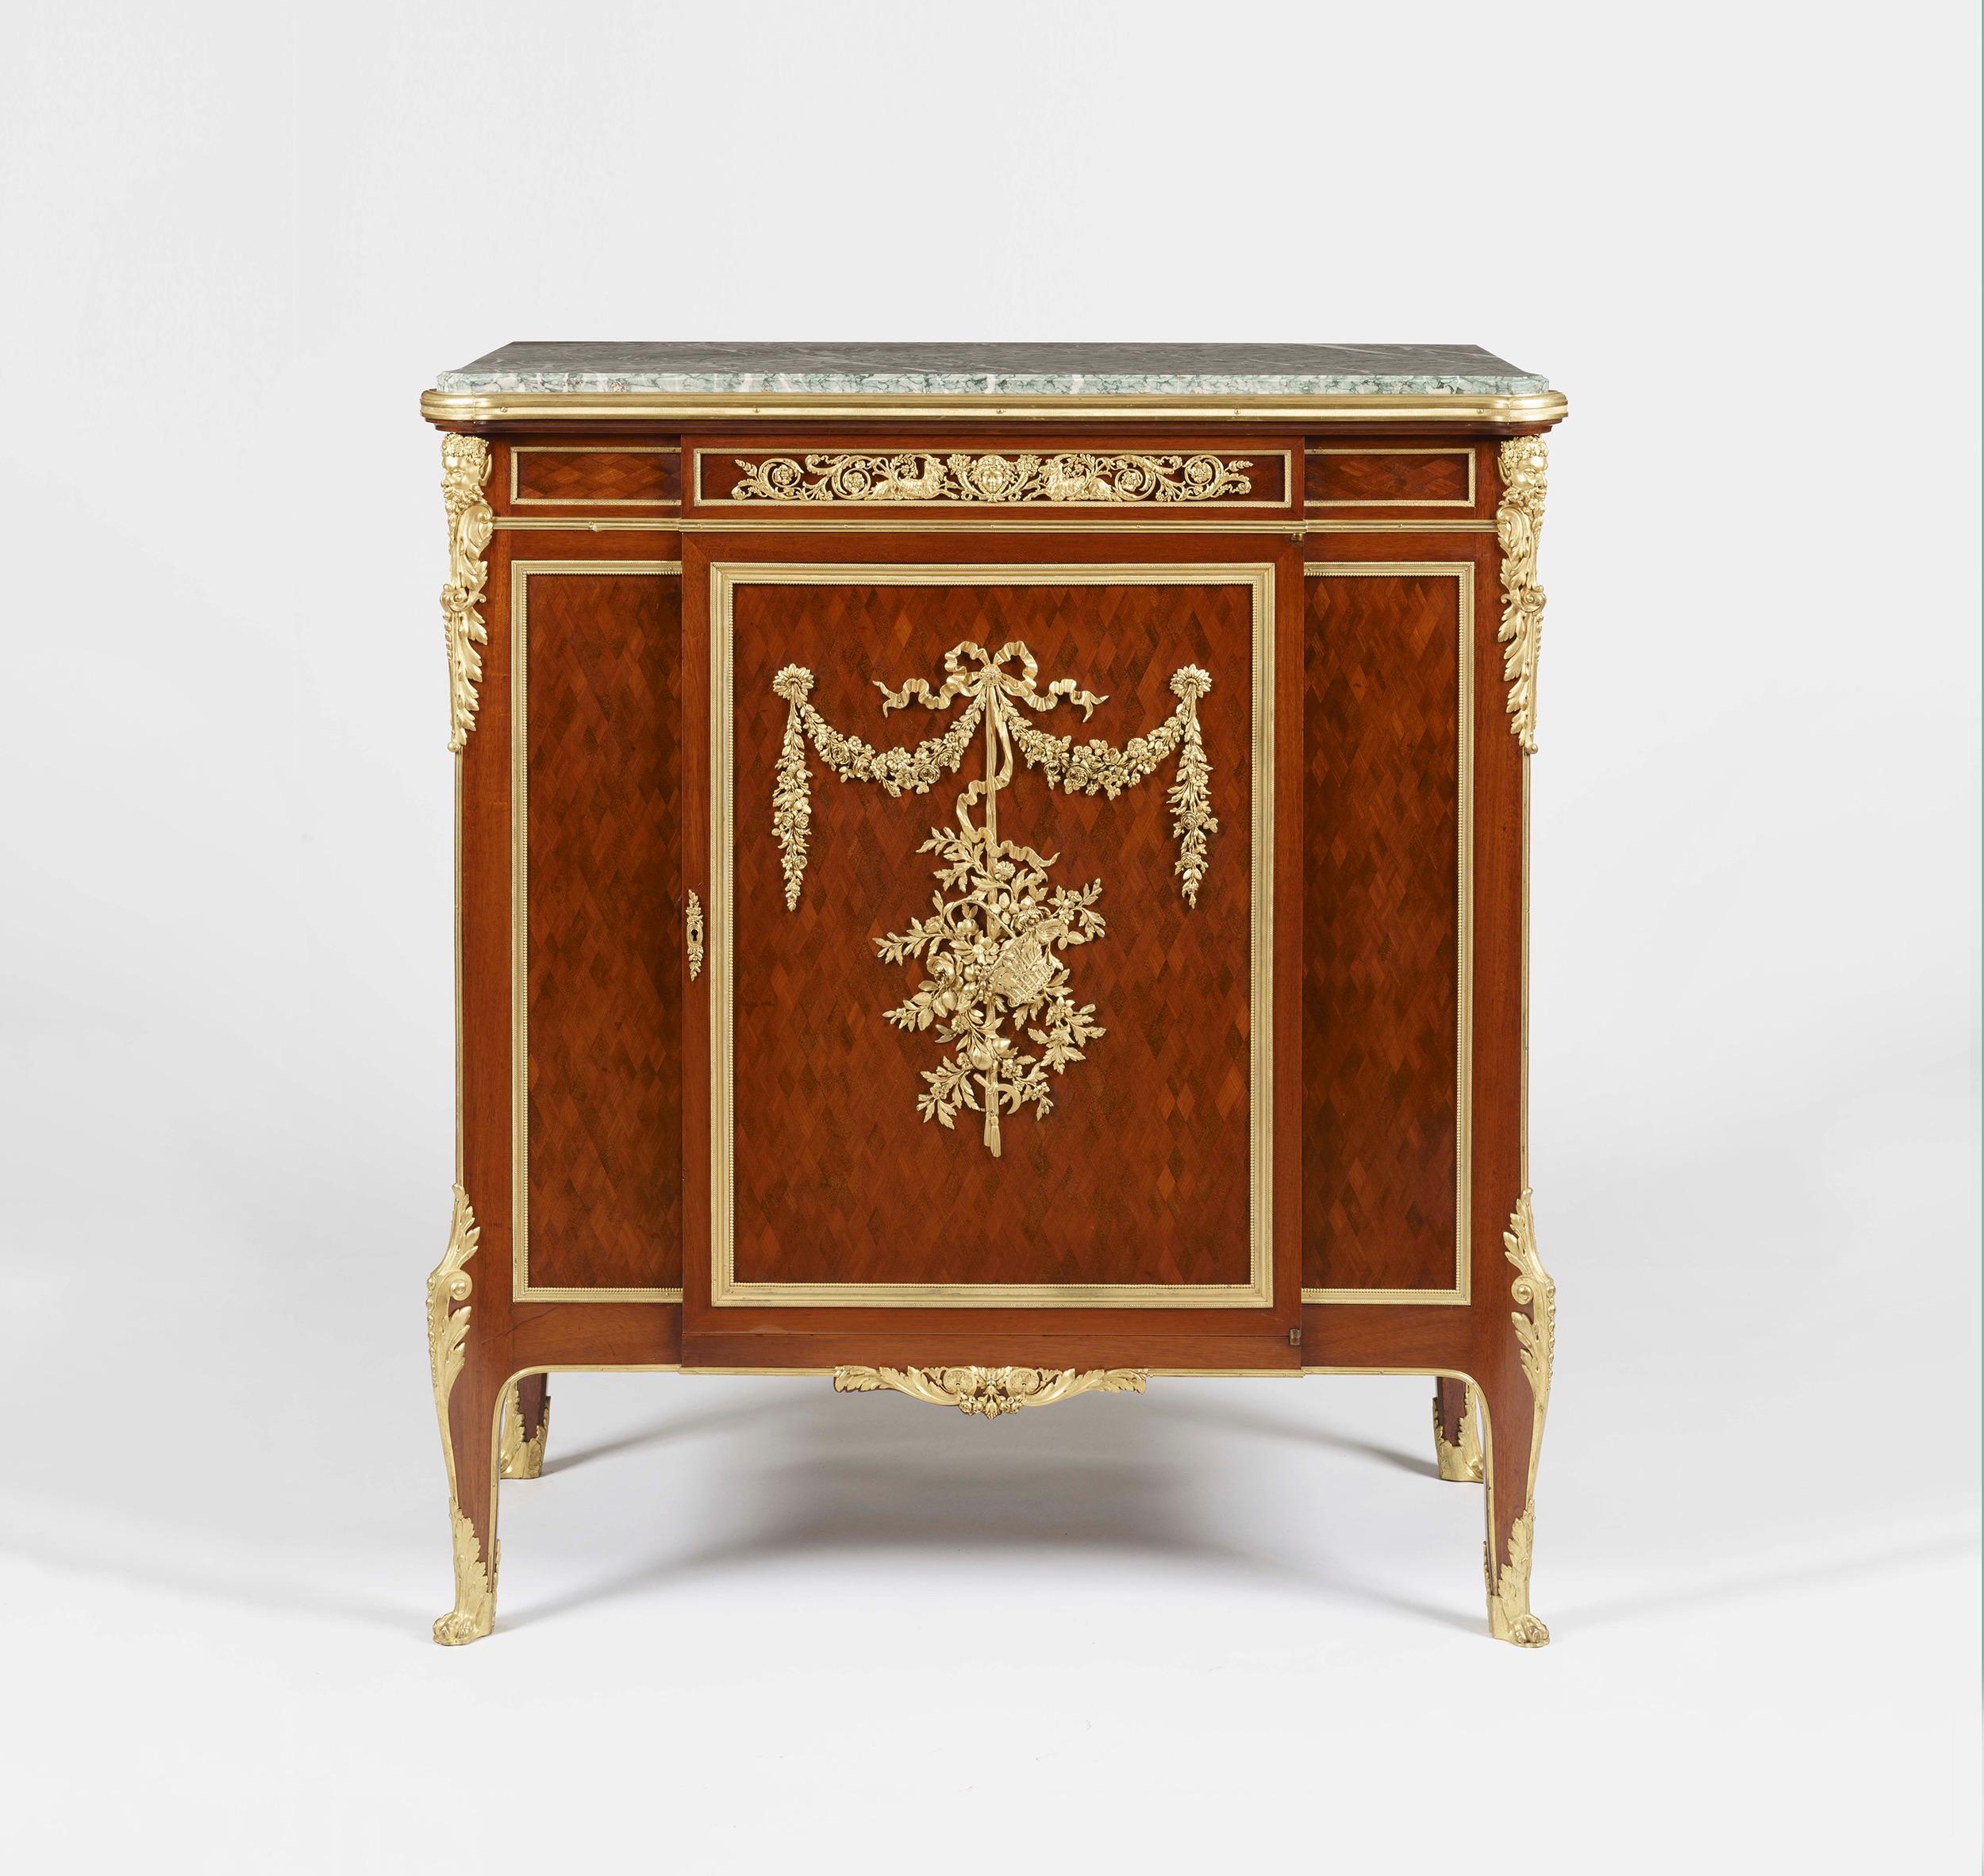 An Ormolu-mounted and mahogany parquetry cabinet
by François Linke

Constructed in the Louis XV transitional manner, in mahogany parquetry work, and dressed with ormolu mounts of the finest quality, with a Breccia Verde marble platform' rising